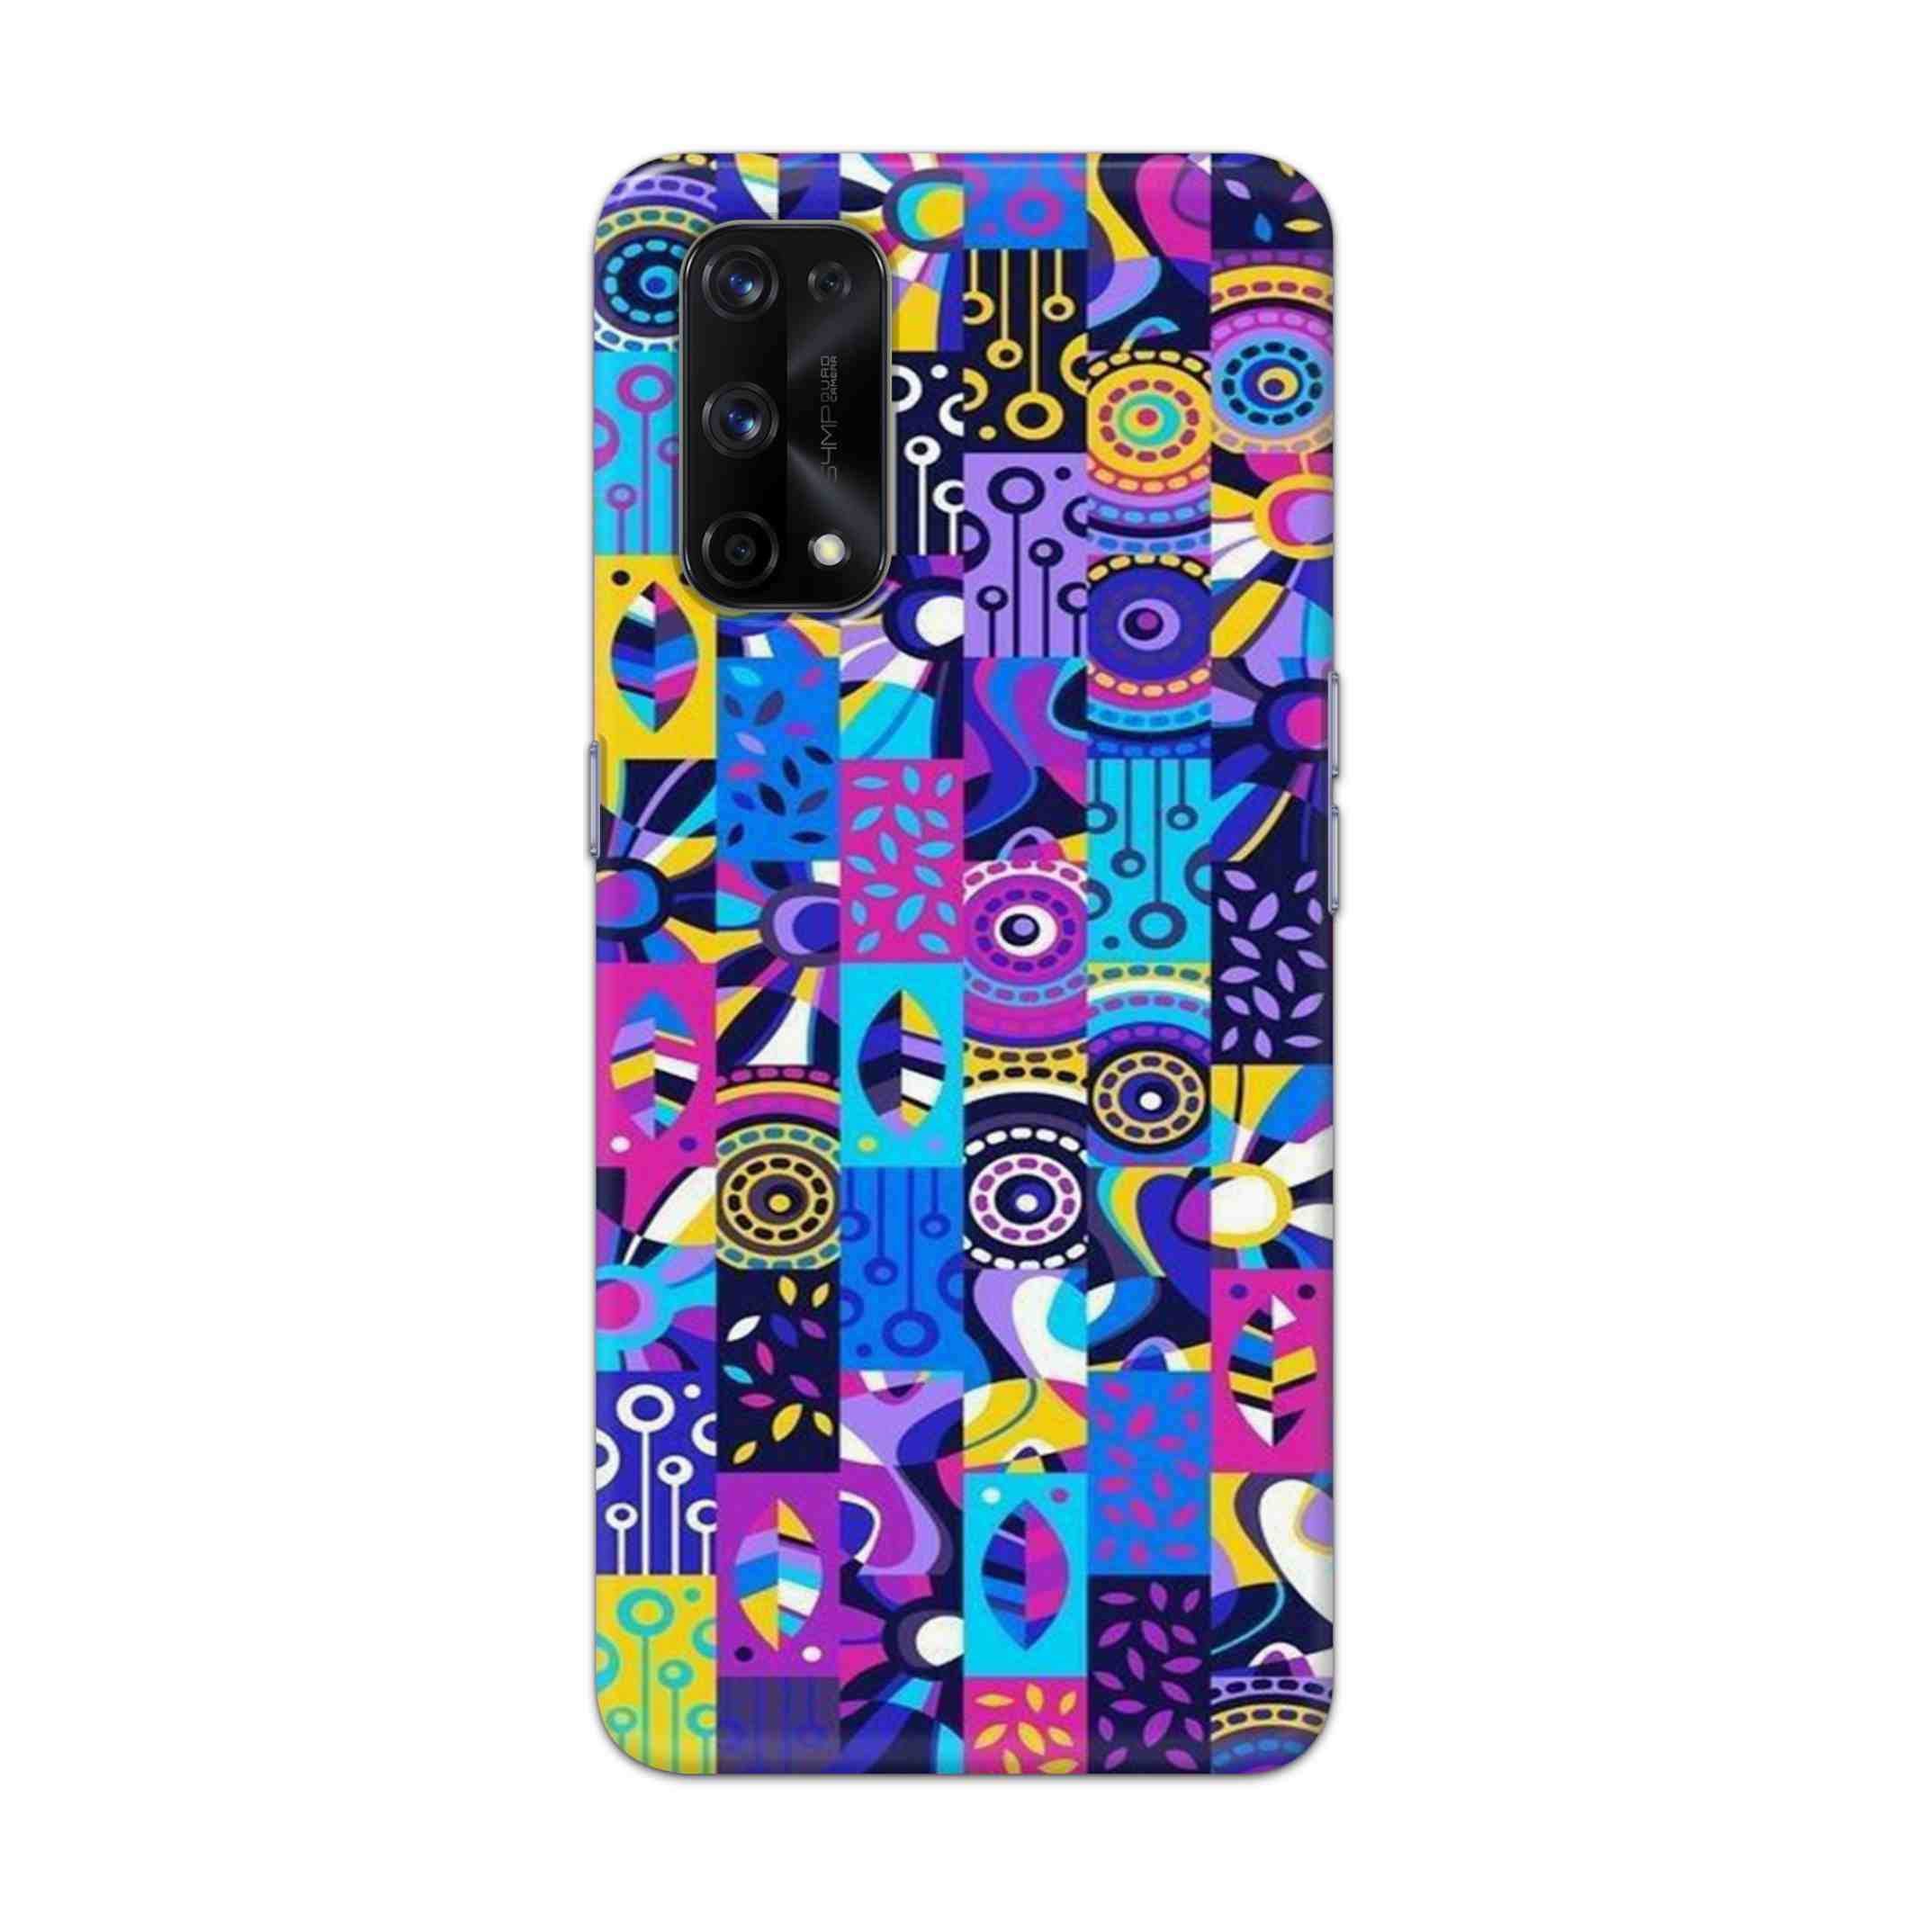 Buy Rainbow Art Hard Back Mobile Phone Case Cover For Realme X7 Pro Online